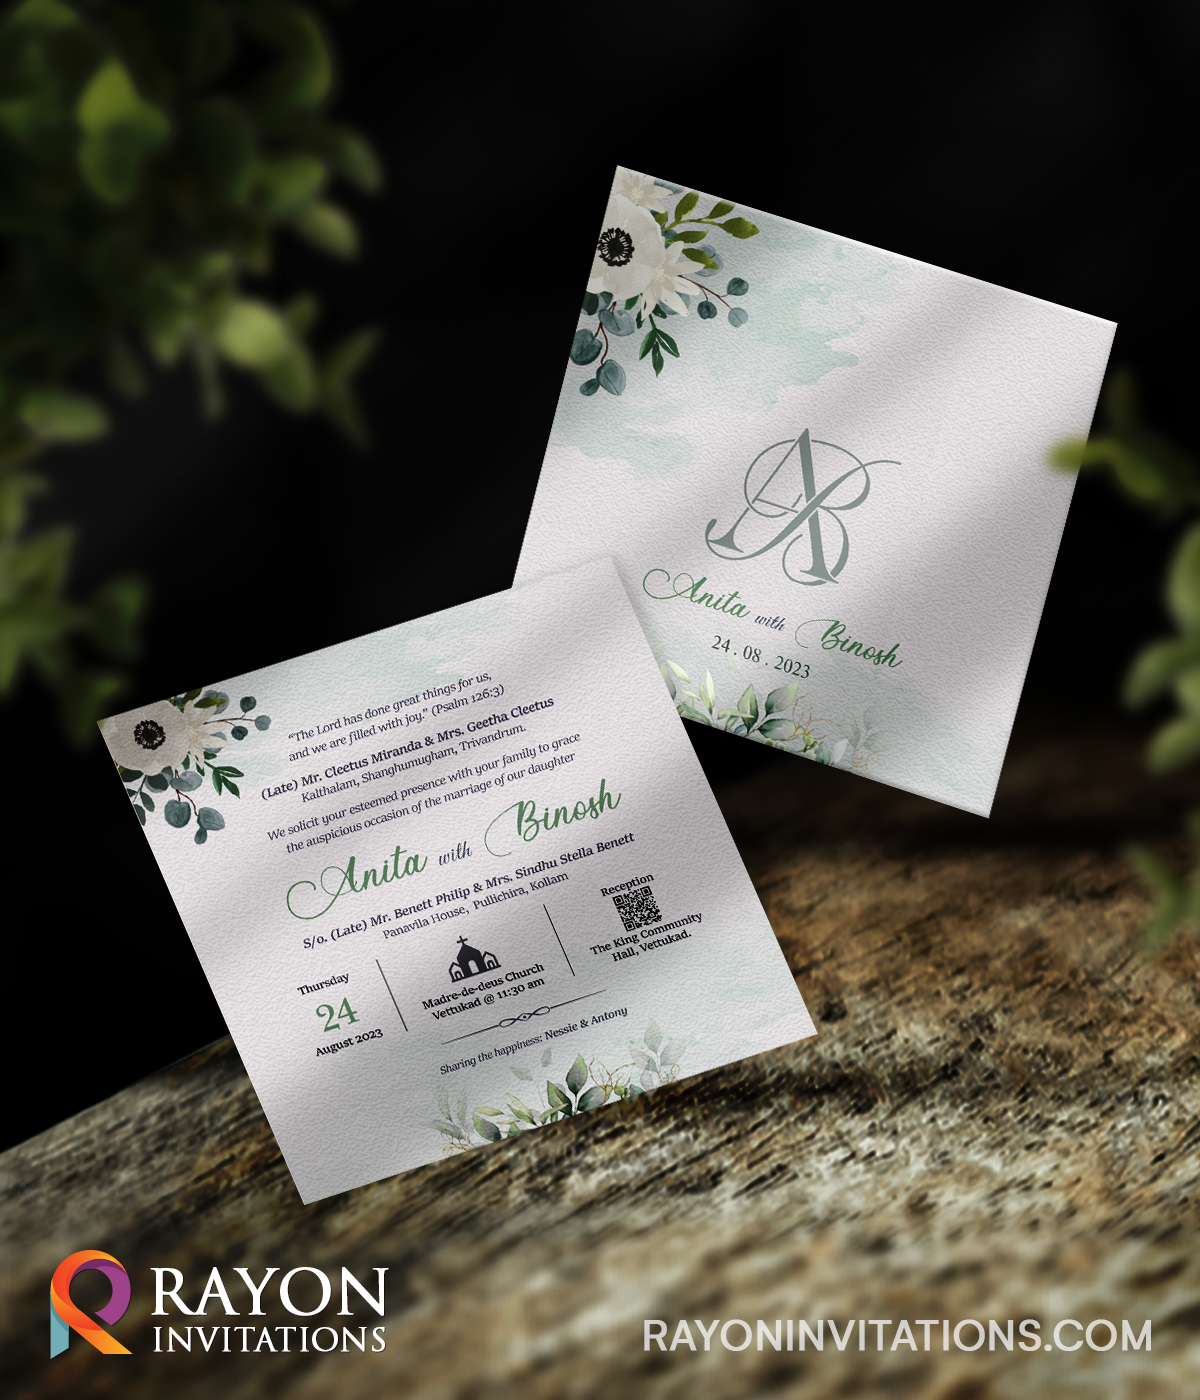 Wedding Cards and Invitation Cards Printing Thrissur Kerala